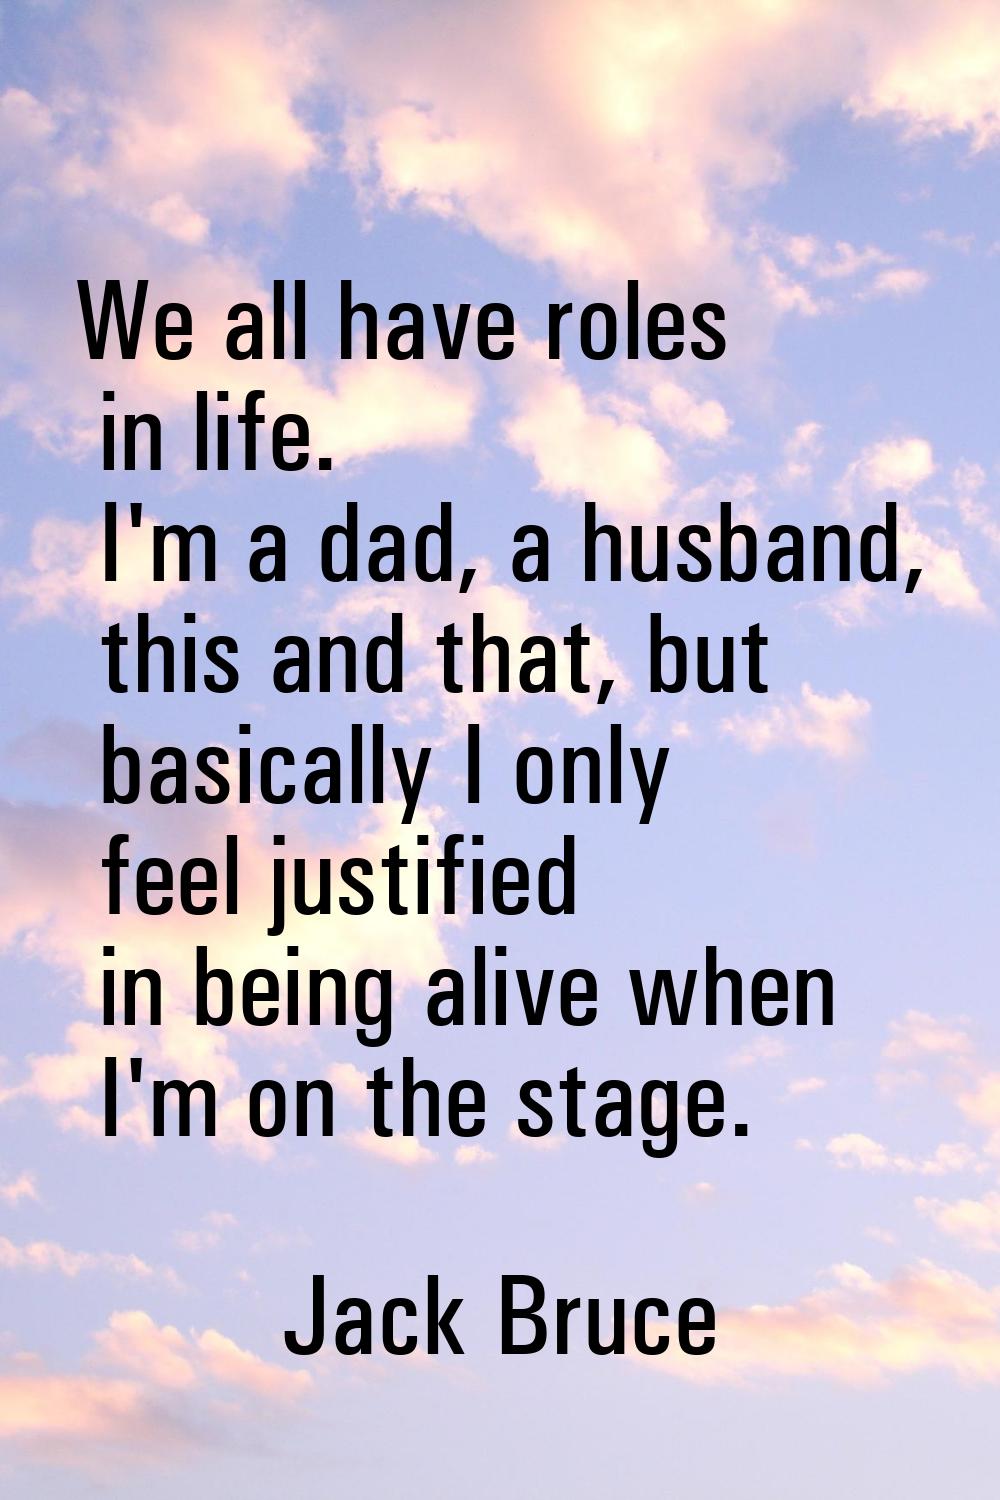 We all have roles in life. I'm a dad, a husband, this and that, but basically I only feel justified